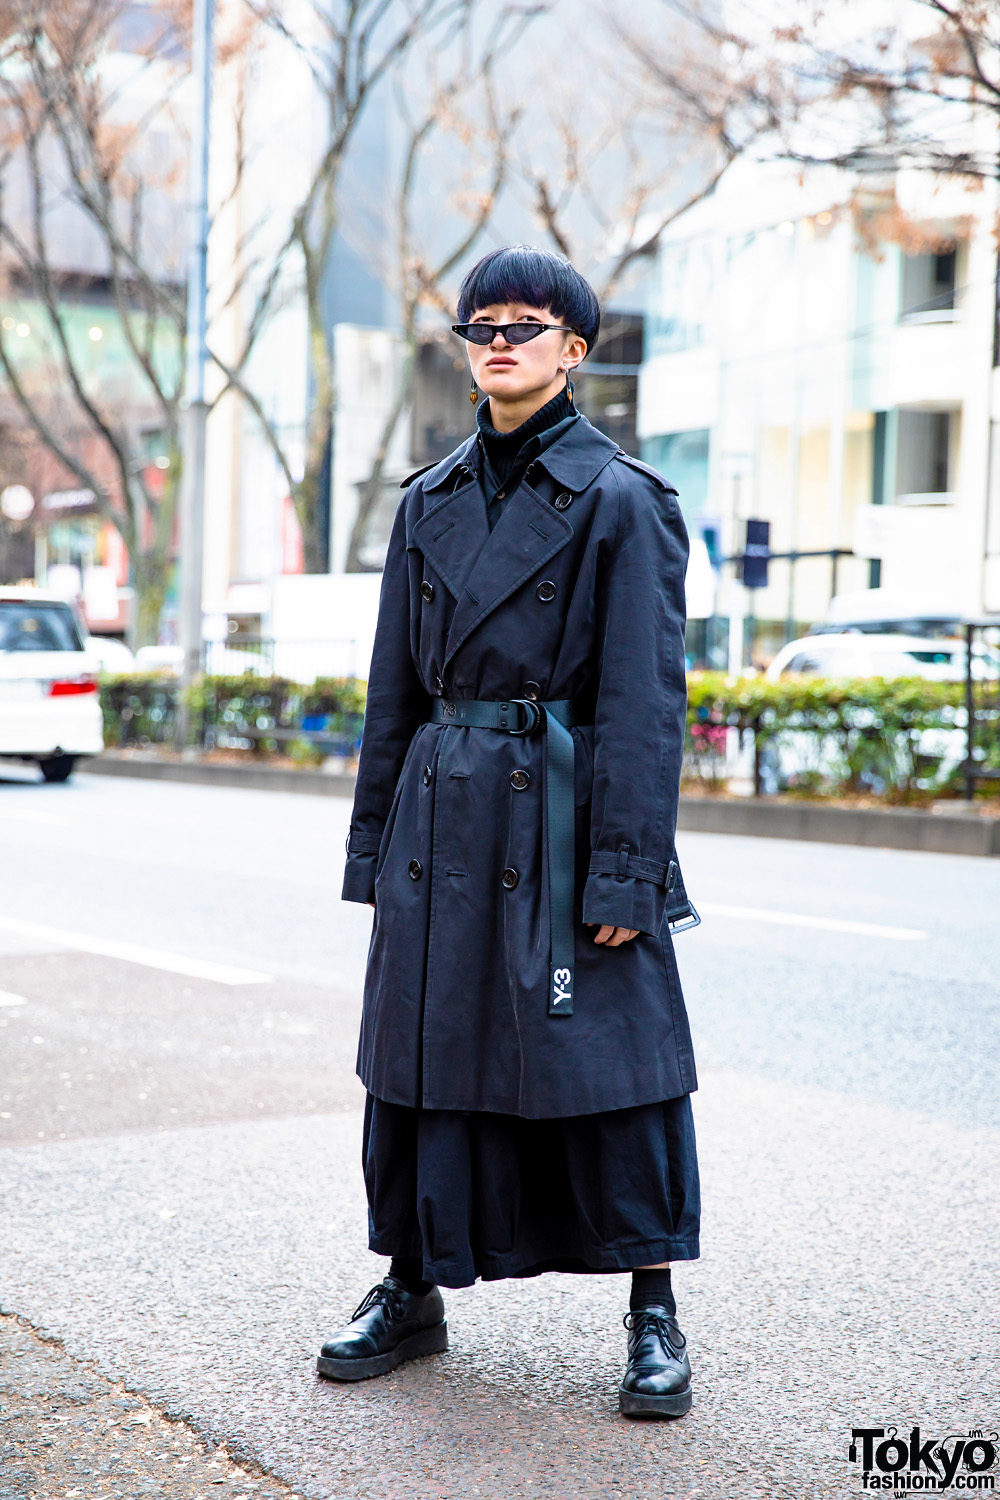 All Black Men's Winter Street Style w/ Burberry Trench Coat, Y-3, Notch  Wide Pants, Whoop-De-Doo Shoes & SAAD Pointy Glasses – Tokyo Fashion